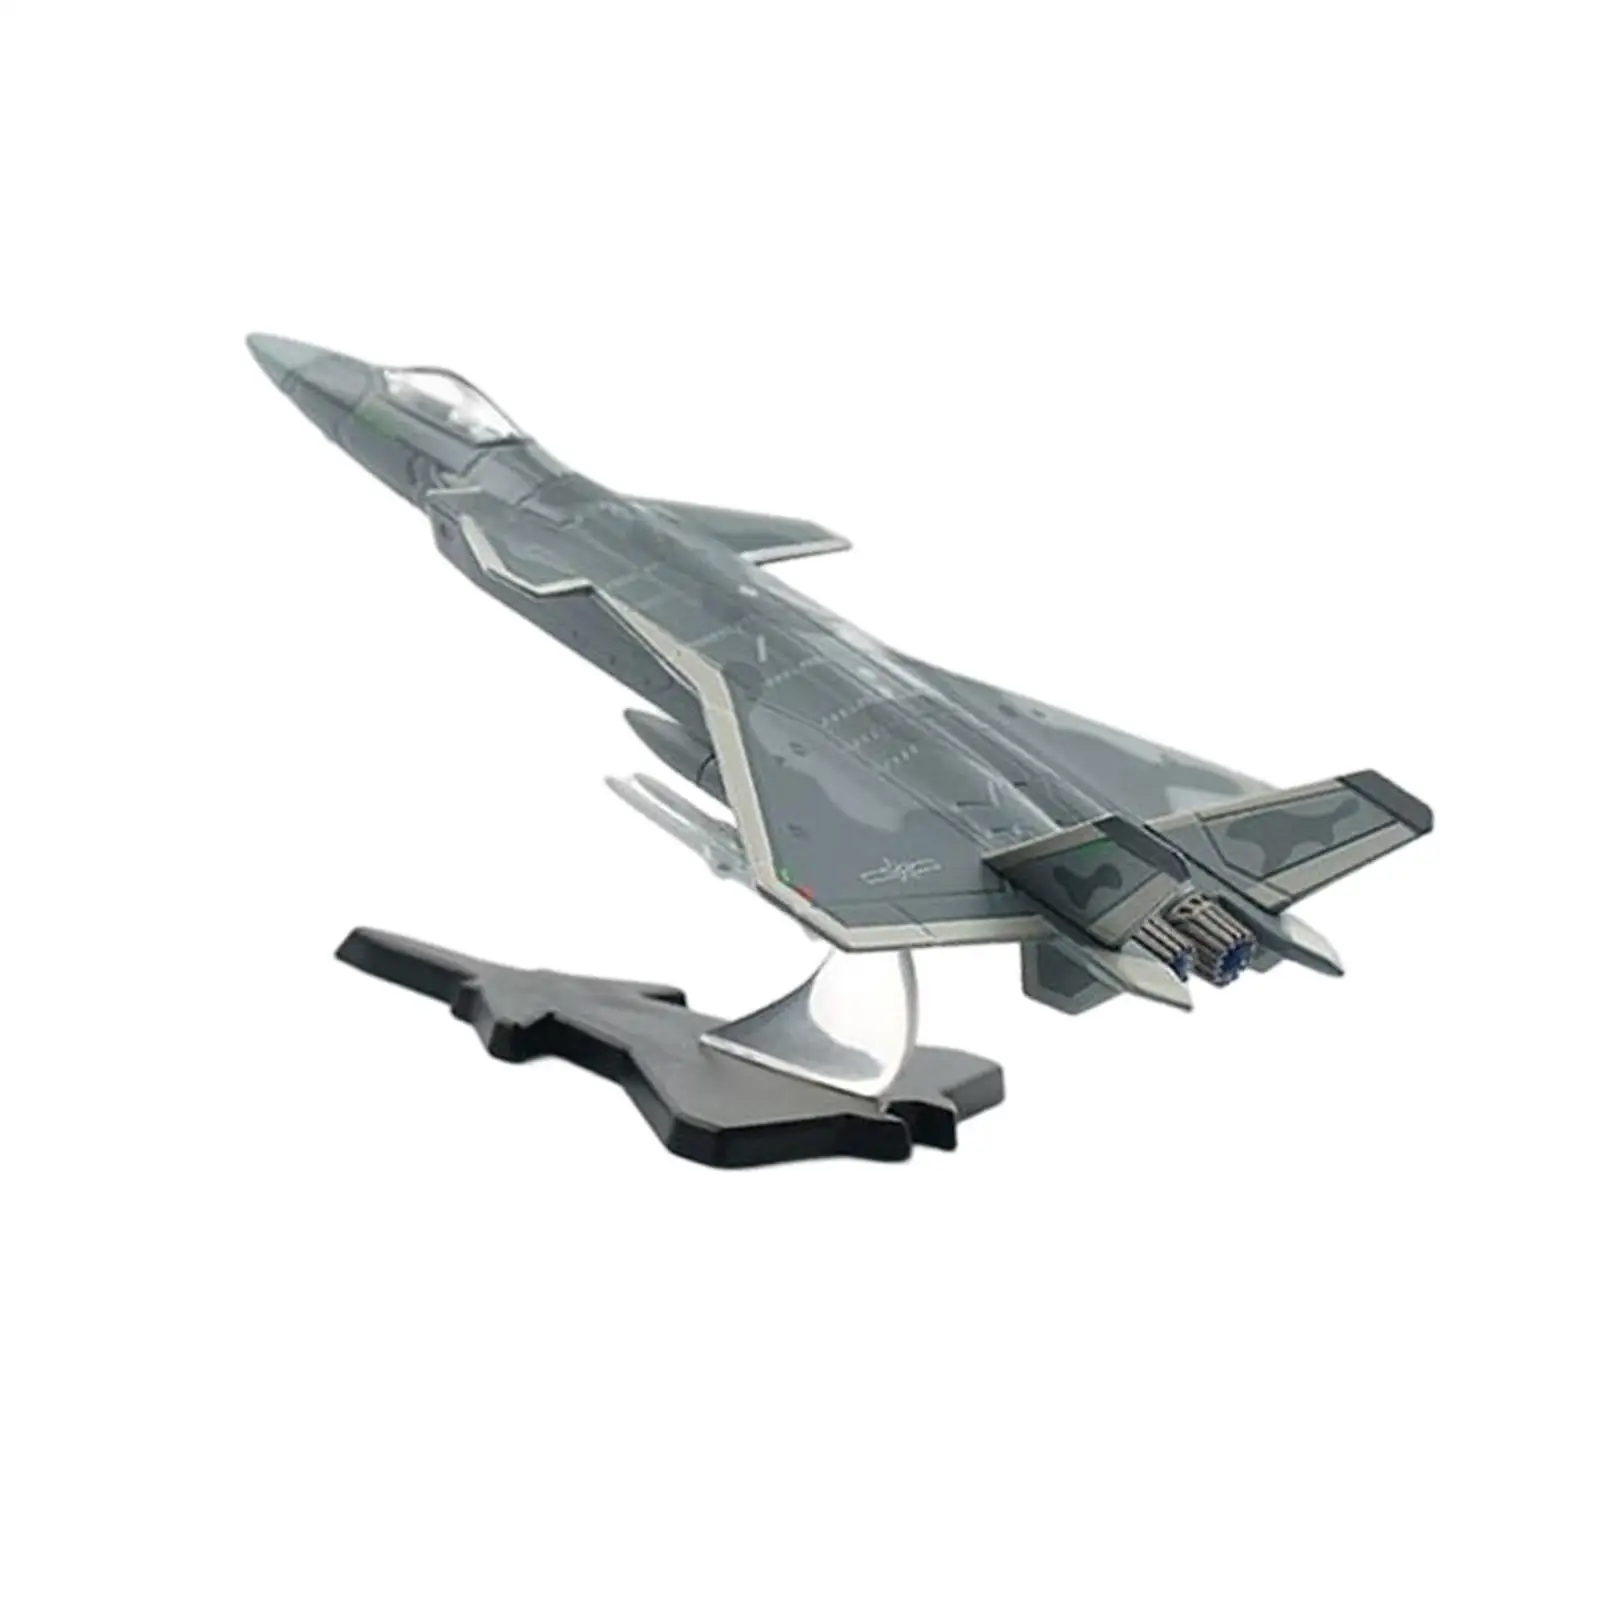 1:200 Scale Plane Model J20 Diecast Plane Display Ornaments Fighter Model for Cafe Bar Shelf Birthday Gifts Decoration